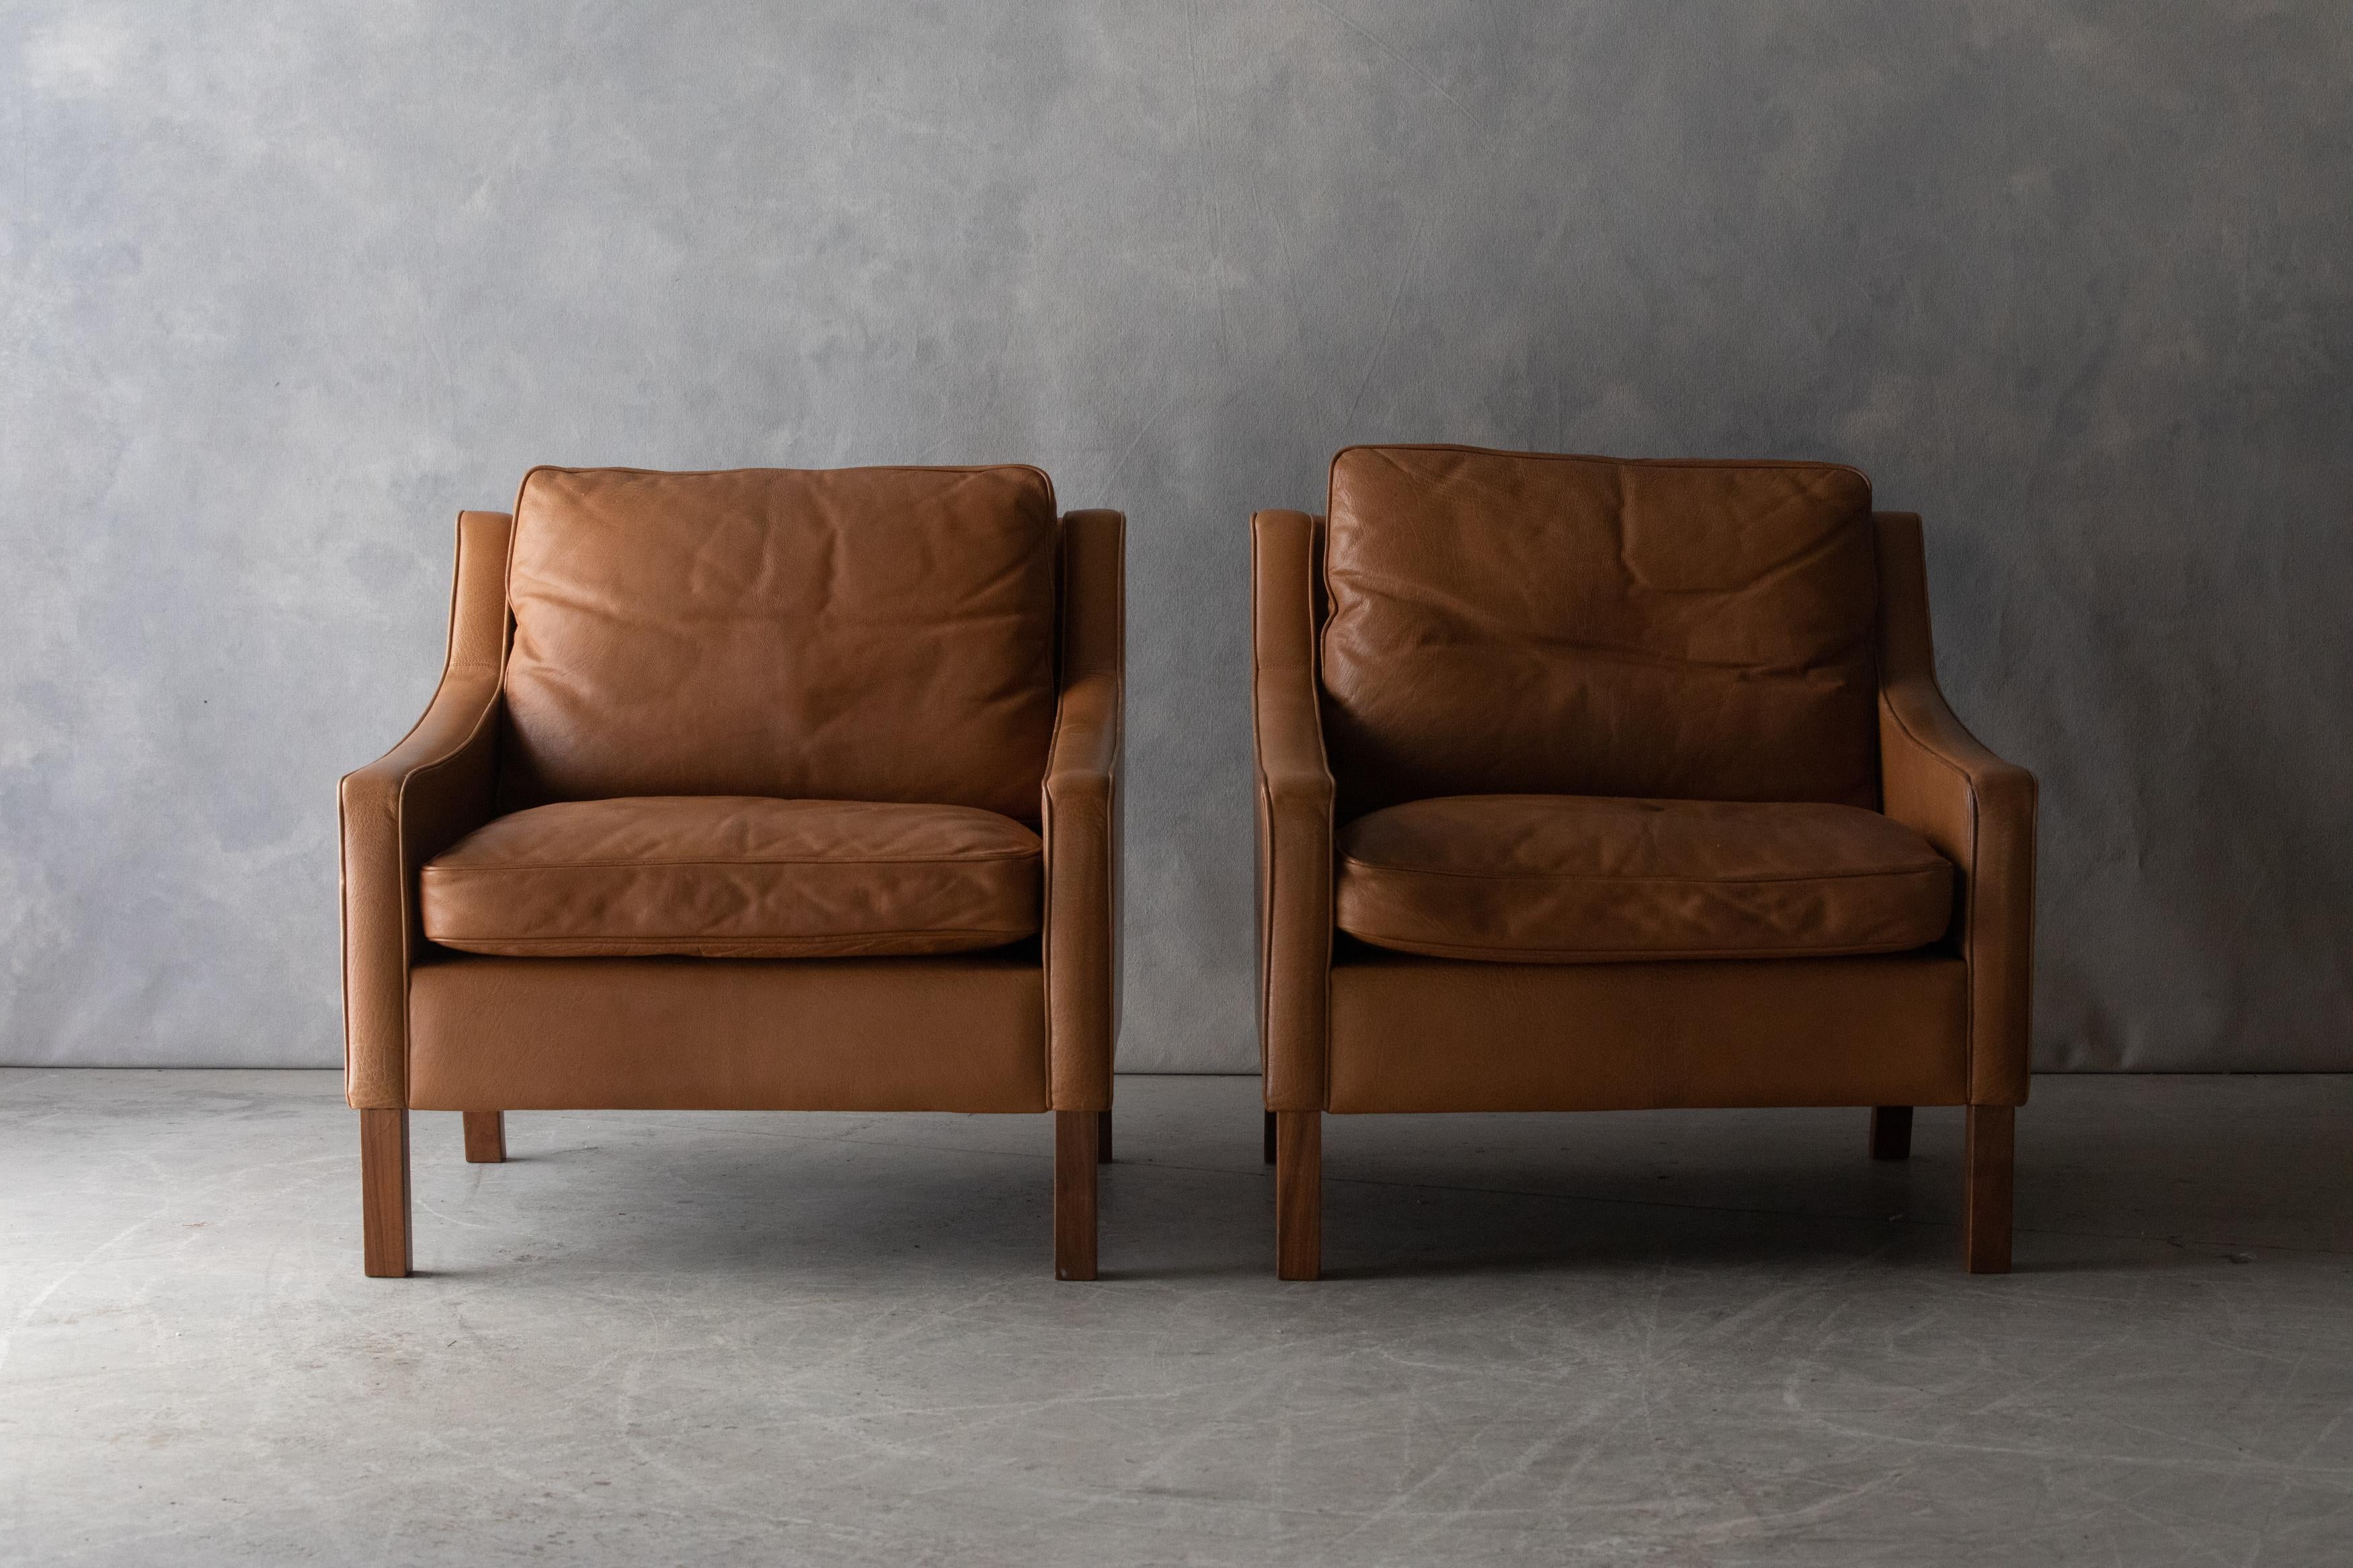 Vintage pair of leather lounge chairs From Denmark, circa 1970. Original cognac leather upholstery with light wear and use. Great condition.

 